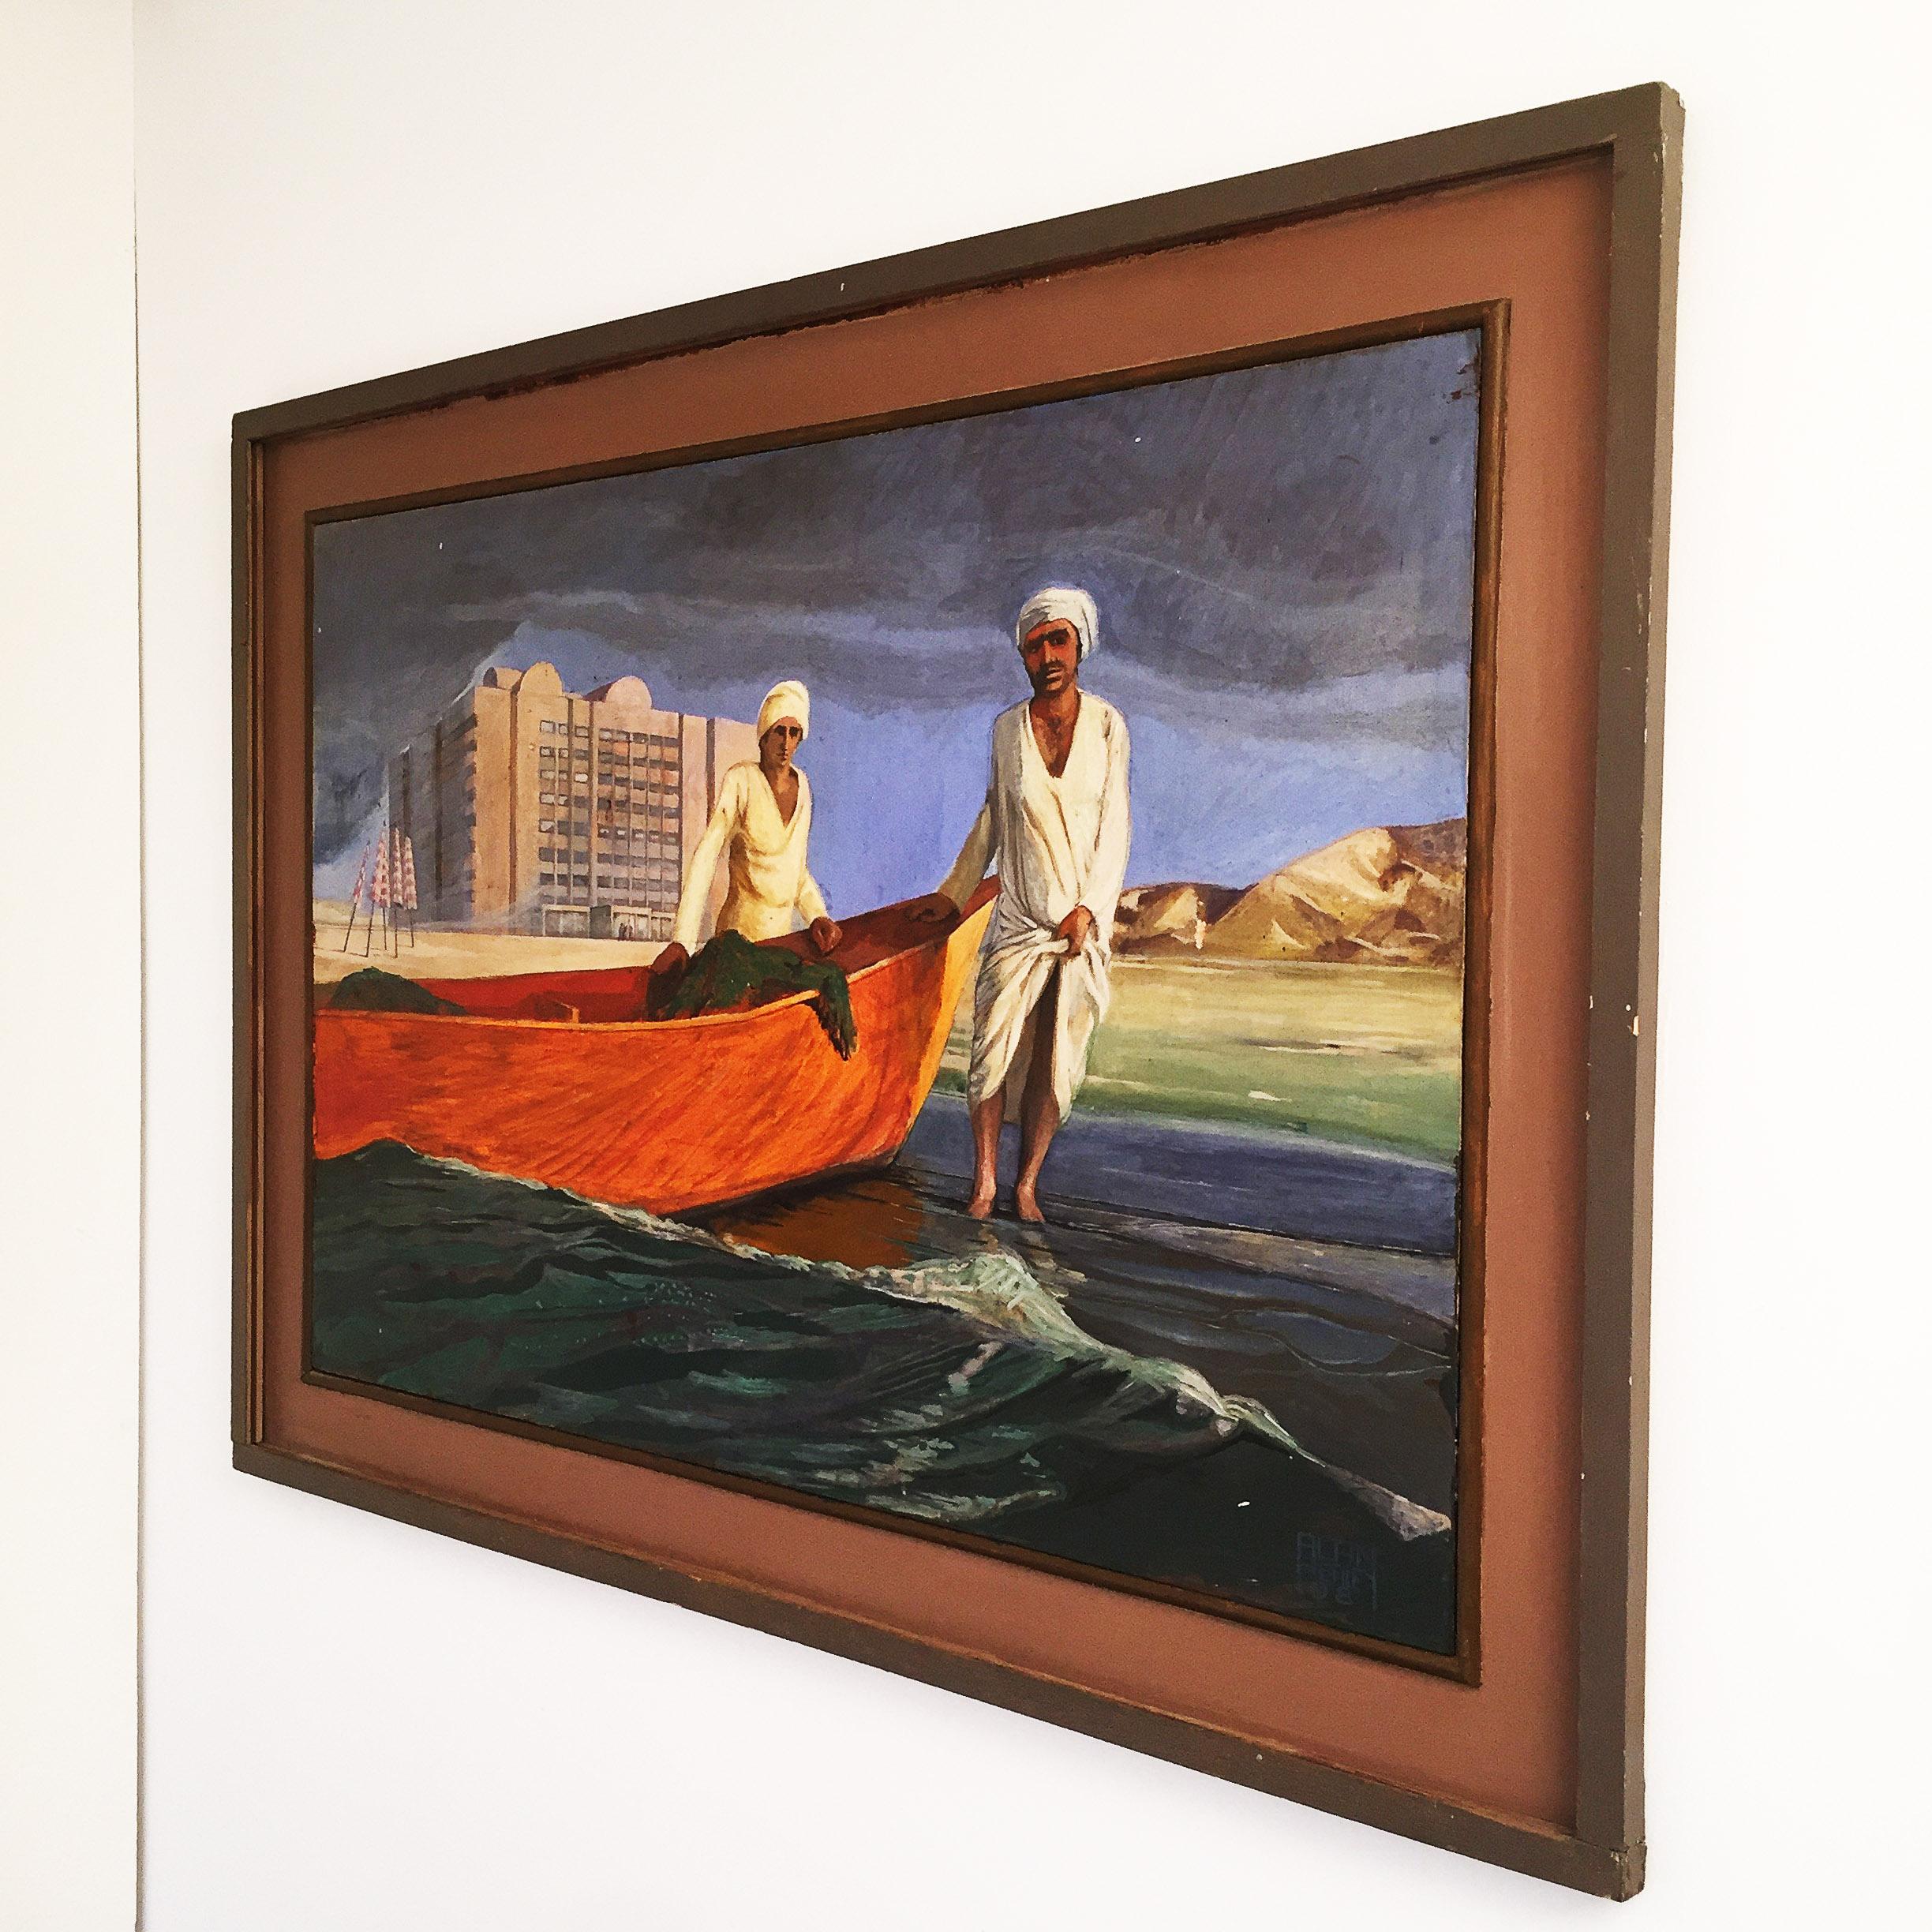 This vintage arabesque painting, signed by Alan Healey and painted in the early 1980s, depicts two North African men pulling their boat in from the sea for fishing. On the backdrop is a large building, possibly a hotel, with striped umbrellas on the